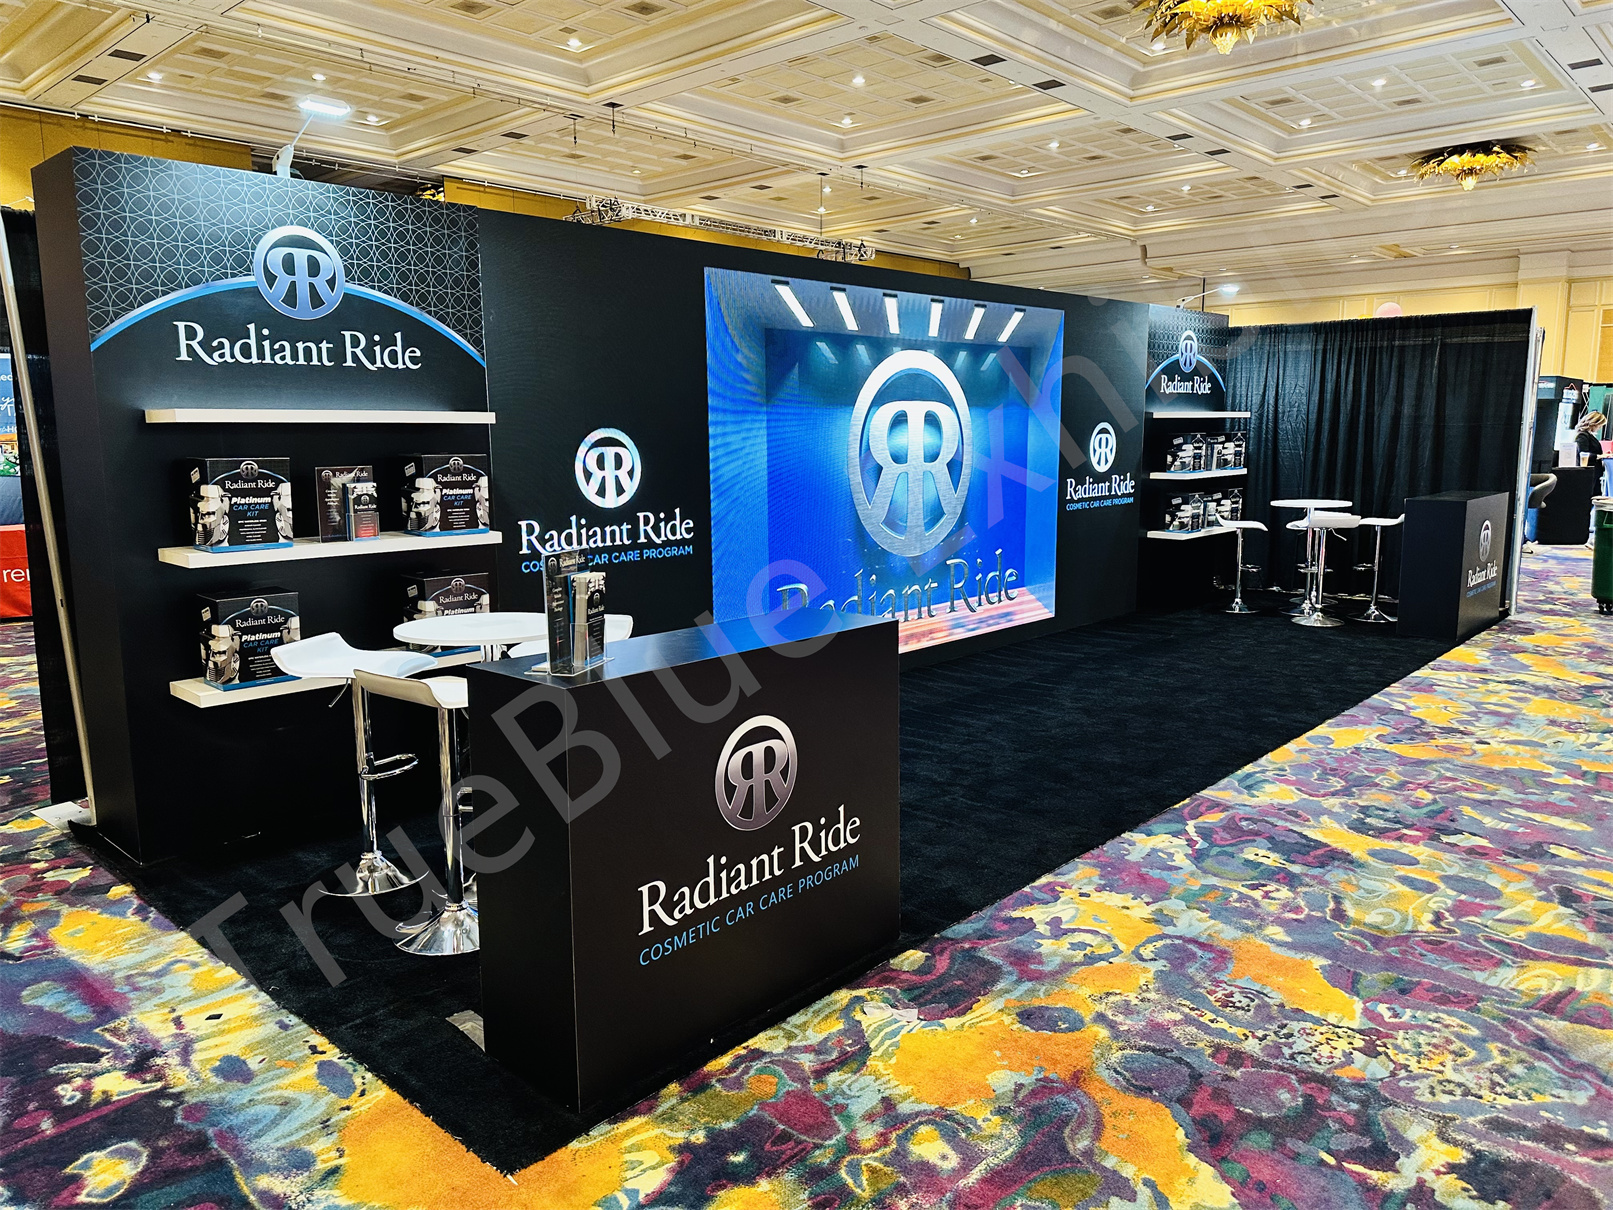 Radiant Ride 10′ x 30′ Digital Dealer Conference P3.9 LED Video Wall Booth